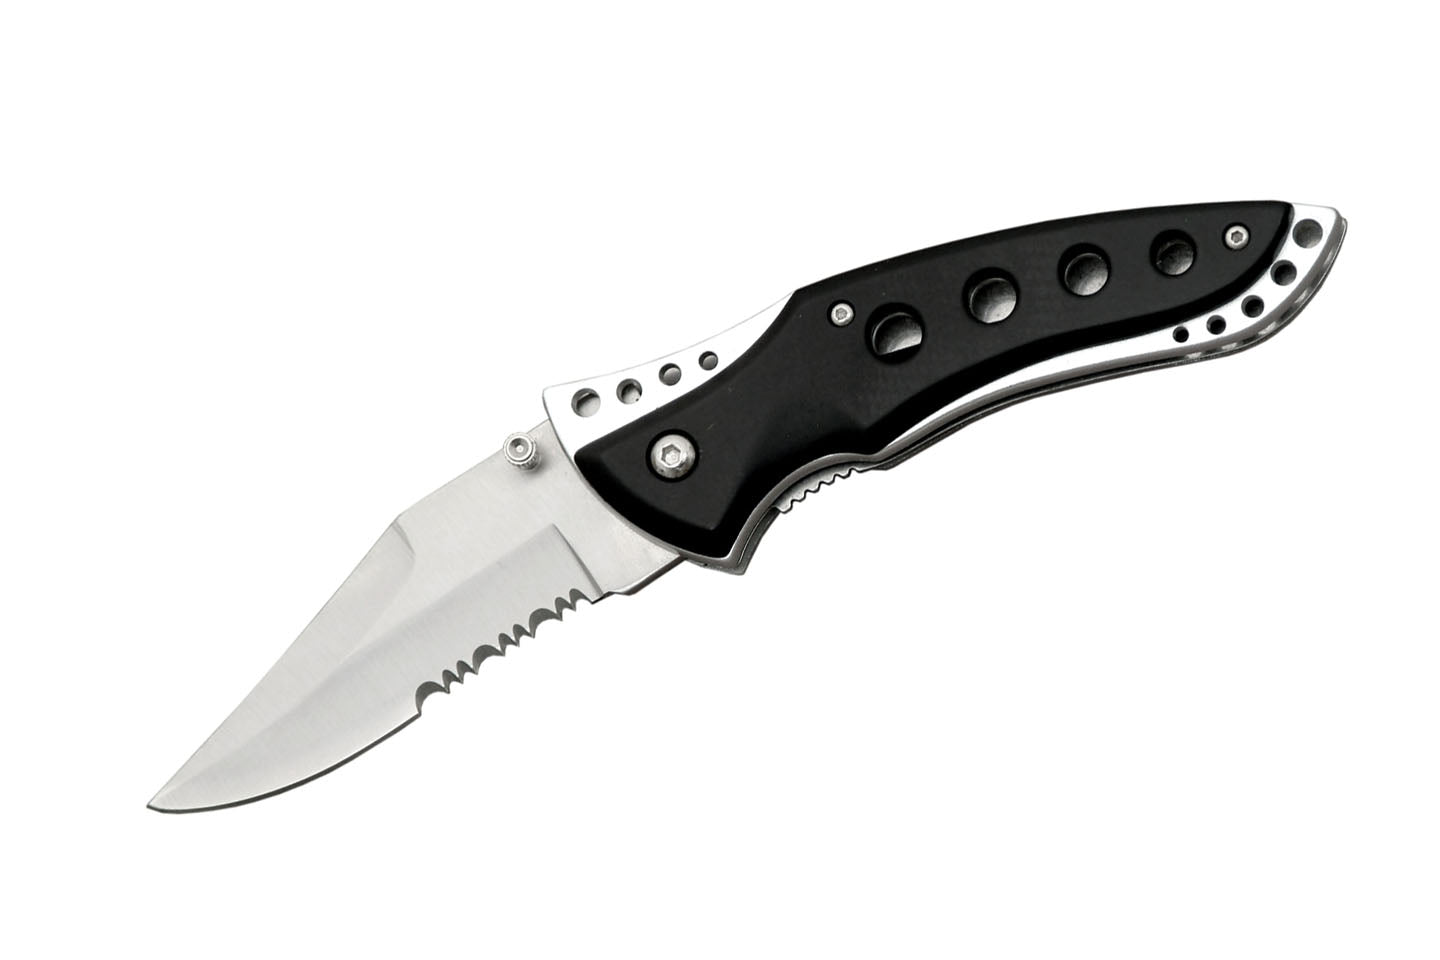 The Fin II Folder Knife with black handle.